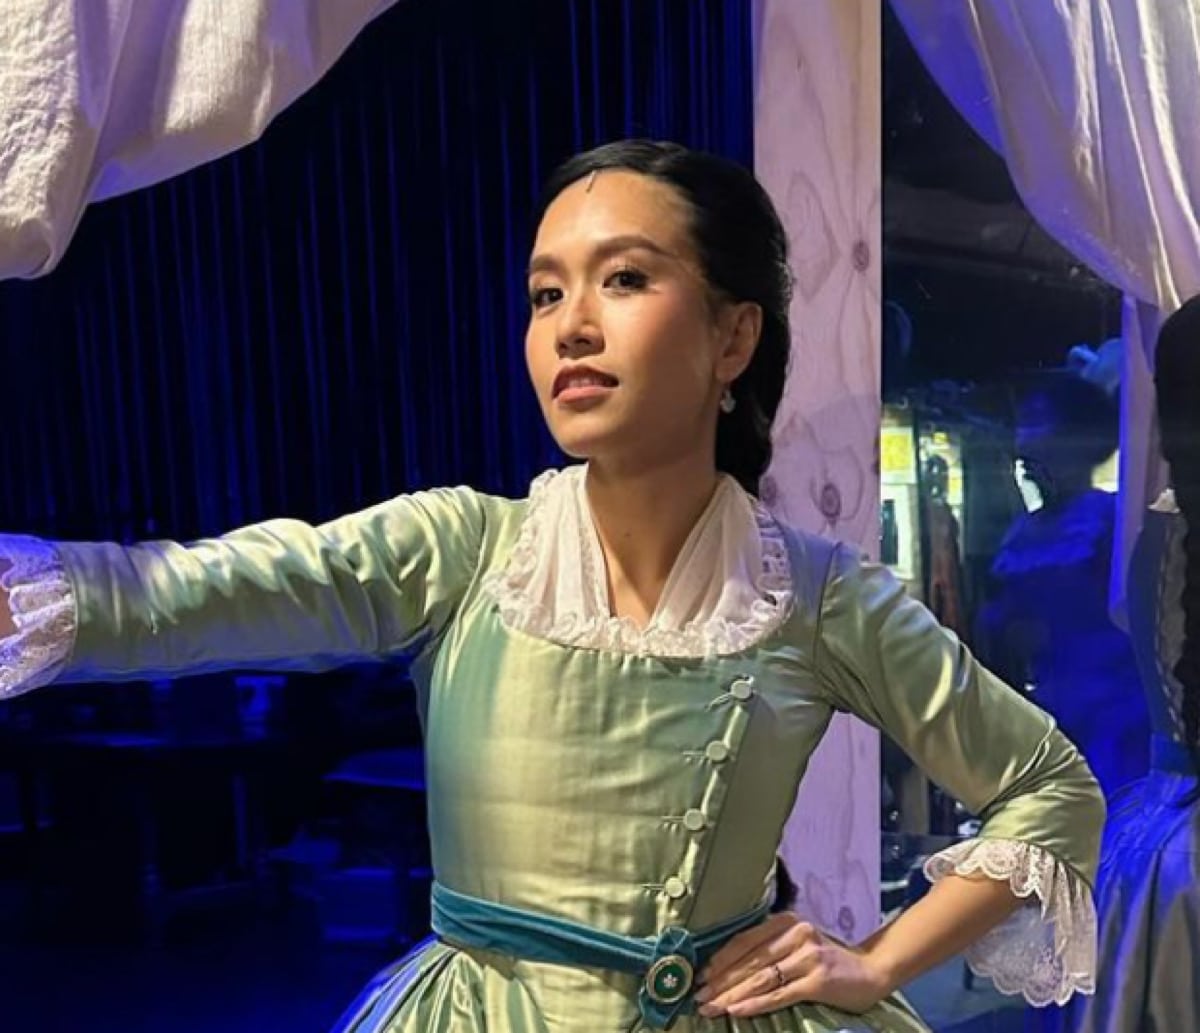 Rachelle Ann Go back on 'Hamilton' stage after bout with pneumonia